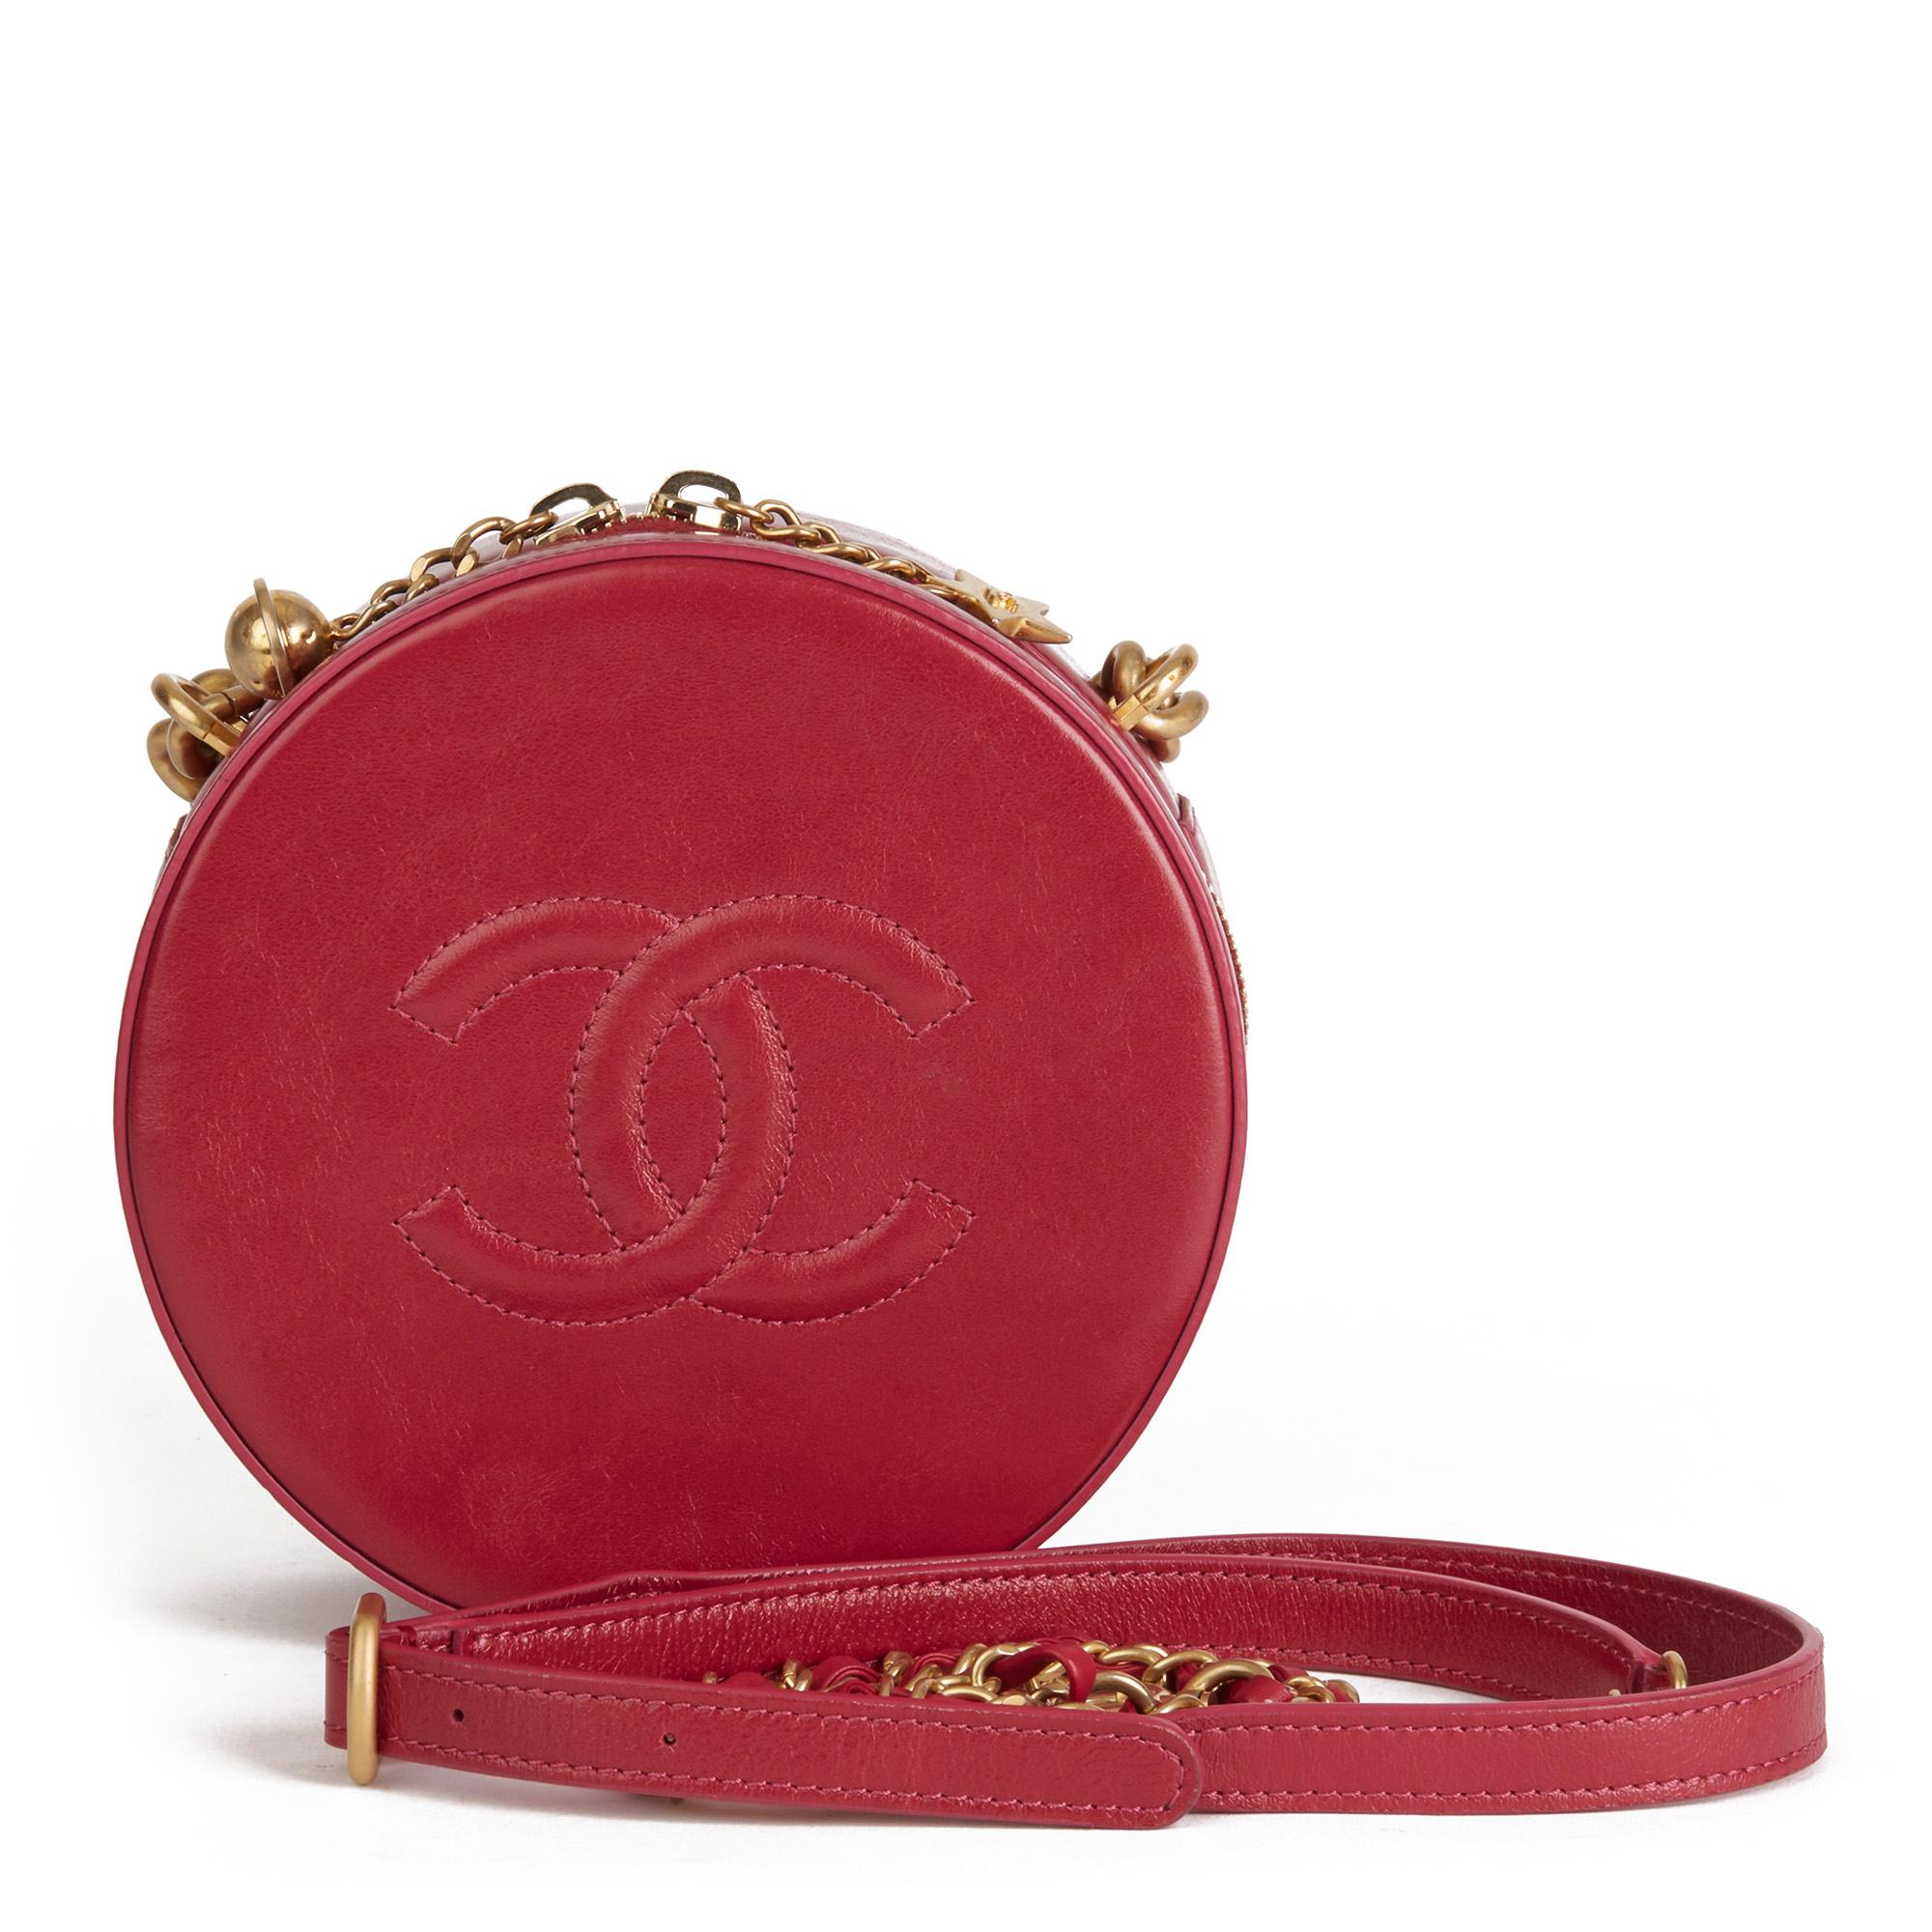 CHANEL 
Raspberry Glazed Calfskin Leather Round as Earth Bag 

Xupes Reference: HB3479
Serial Number: 25094584
Age (Circa): 2018
Authenticity Details: Serial Sticker (Made in Italy)
Gender: Ladies
Type: Top Handle, Shoulder, Crossbody 

Colour: